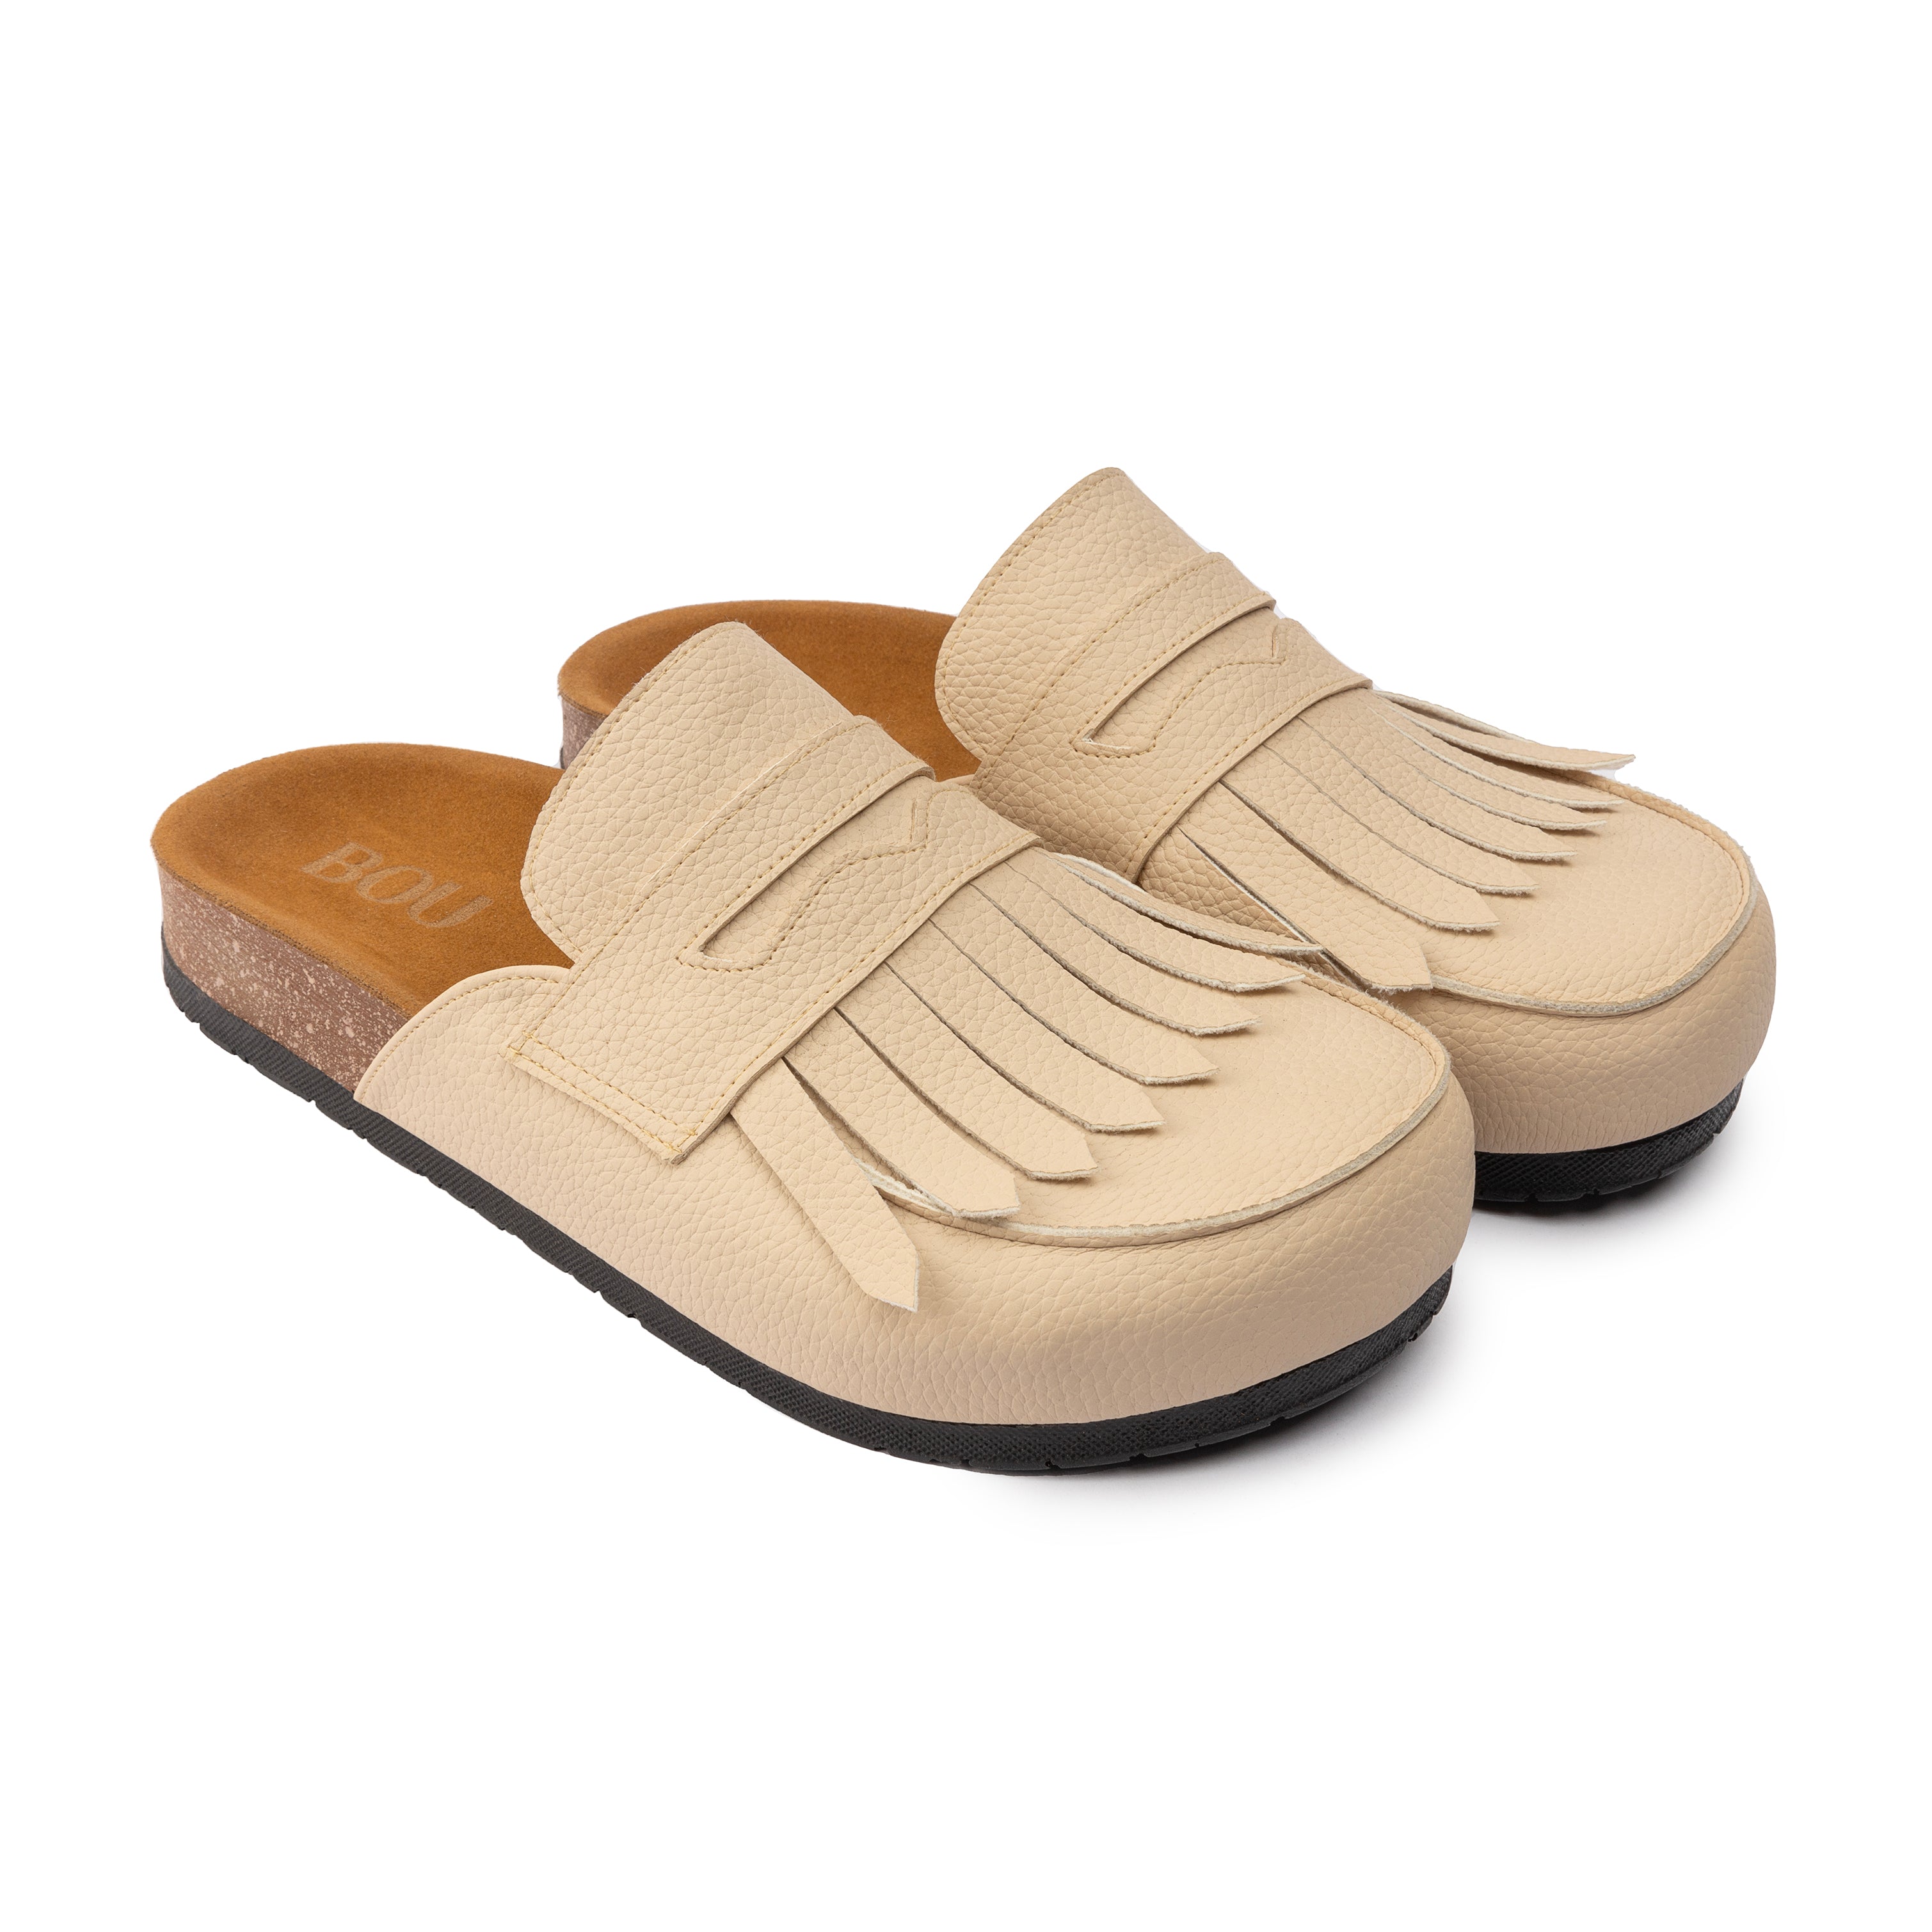 Loafer Clogs " Fringed " - Coffe Latte